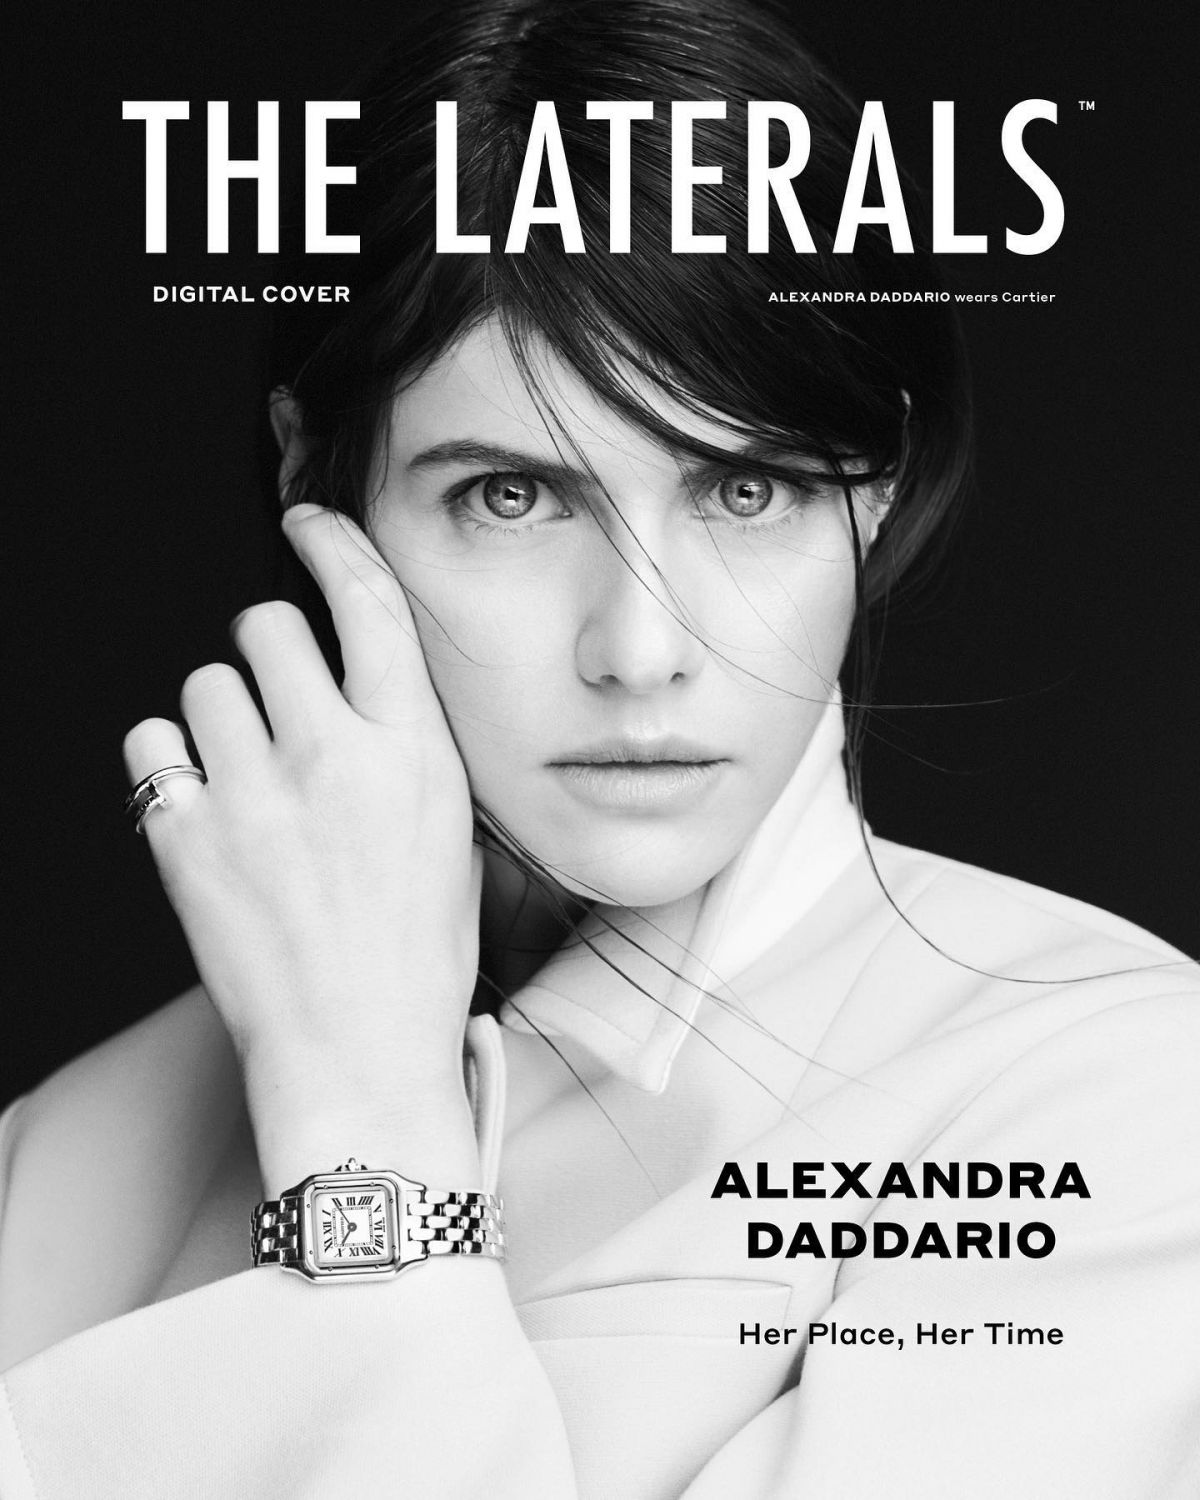 alexandra-daddario-for-the-laterals-july-2021-2.jpg